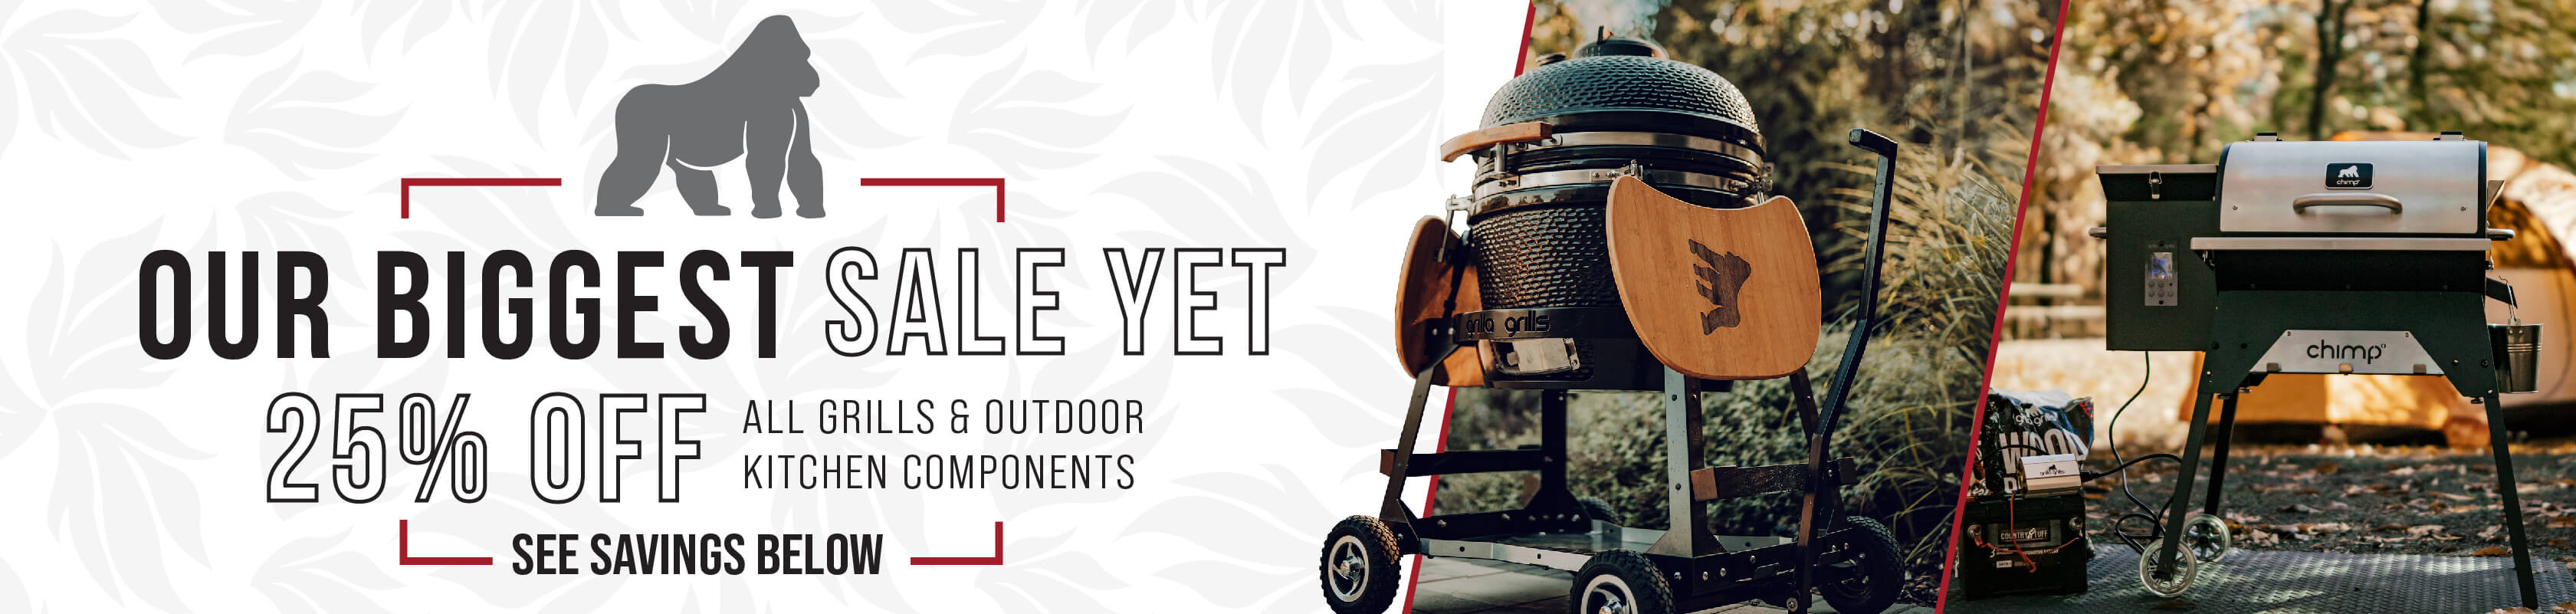  Our Biggest Sale Yet, 25% off all grills and outdoor kitchen components (see savings below)